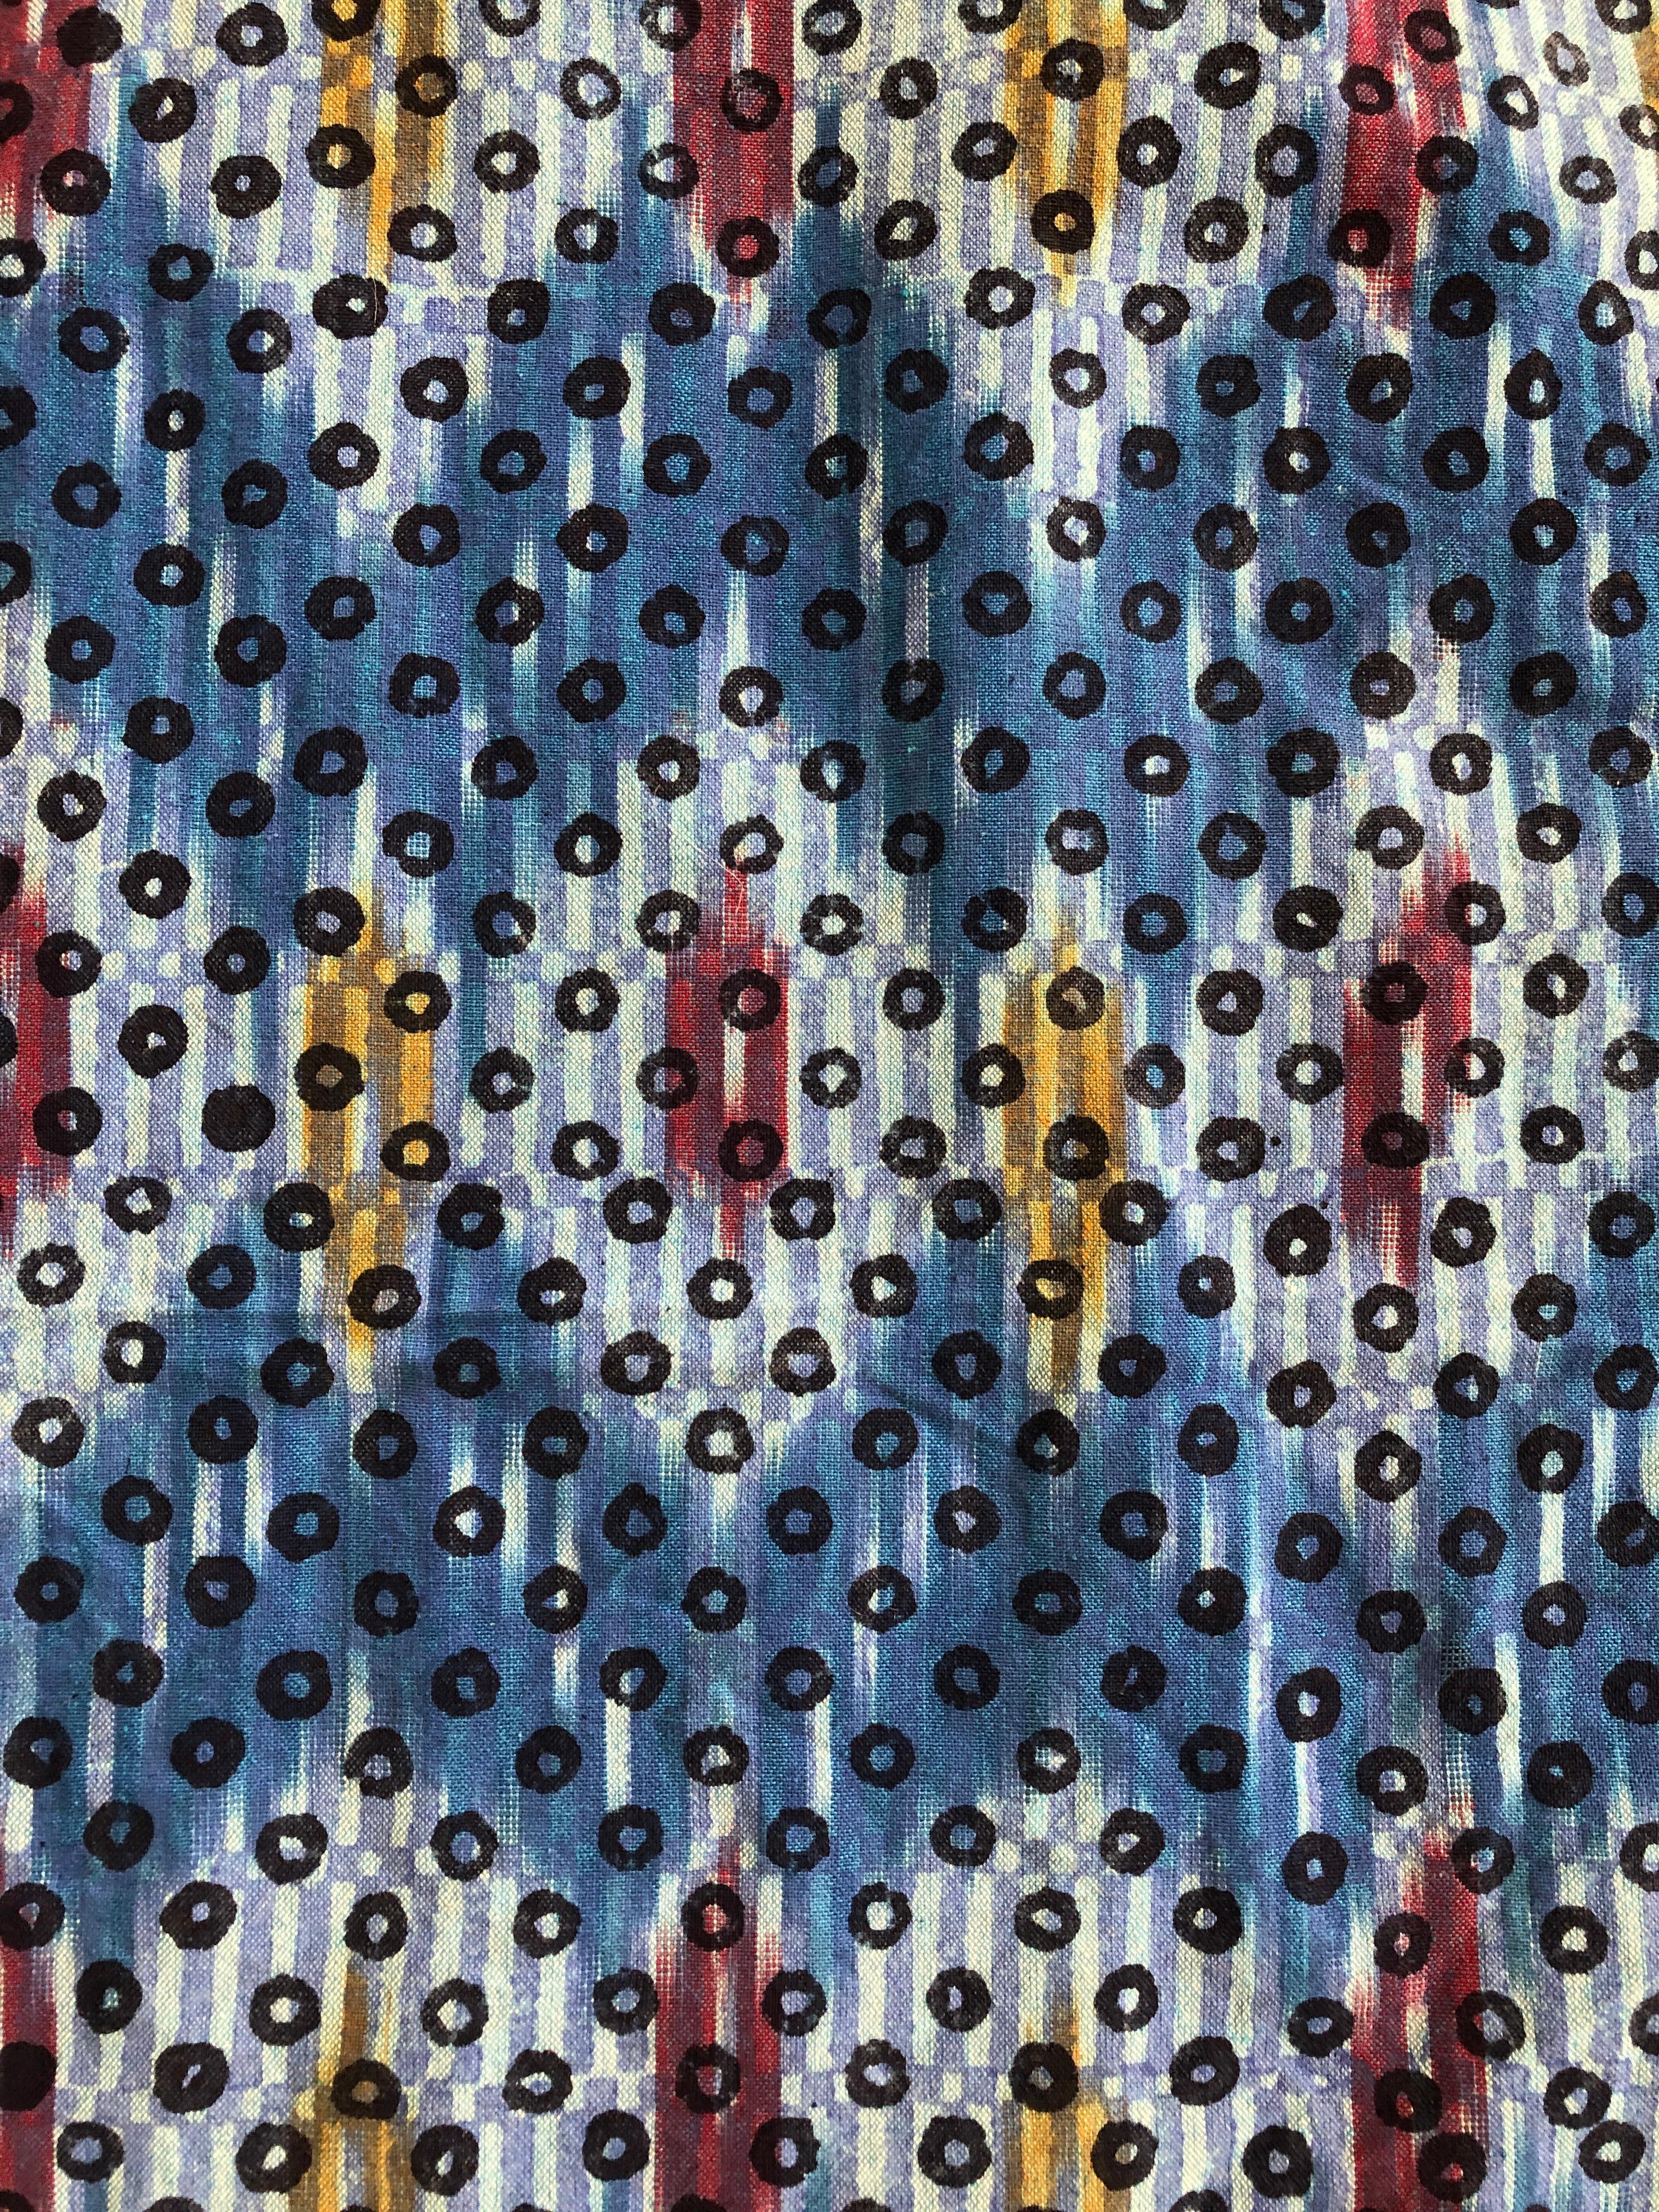 Contemporary Gregory Parkinson Tablecloth with Blue Ikat Hand-Blocked Patterns 1